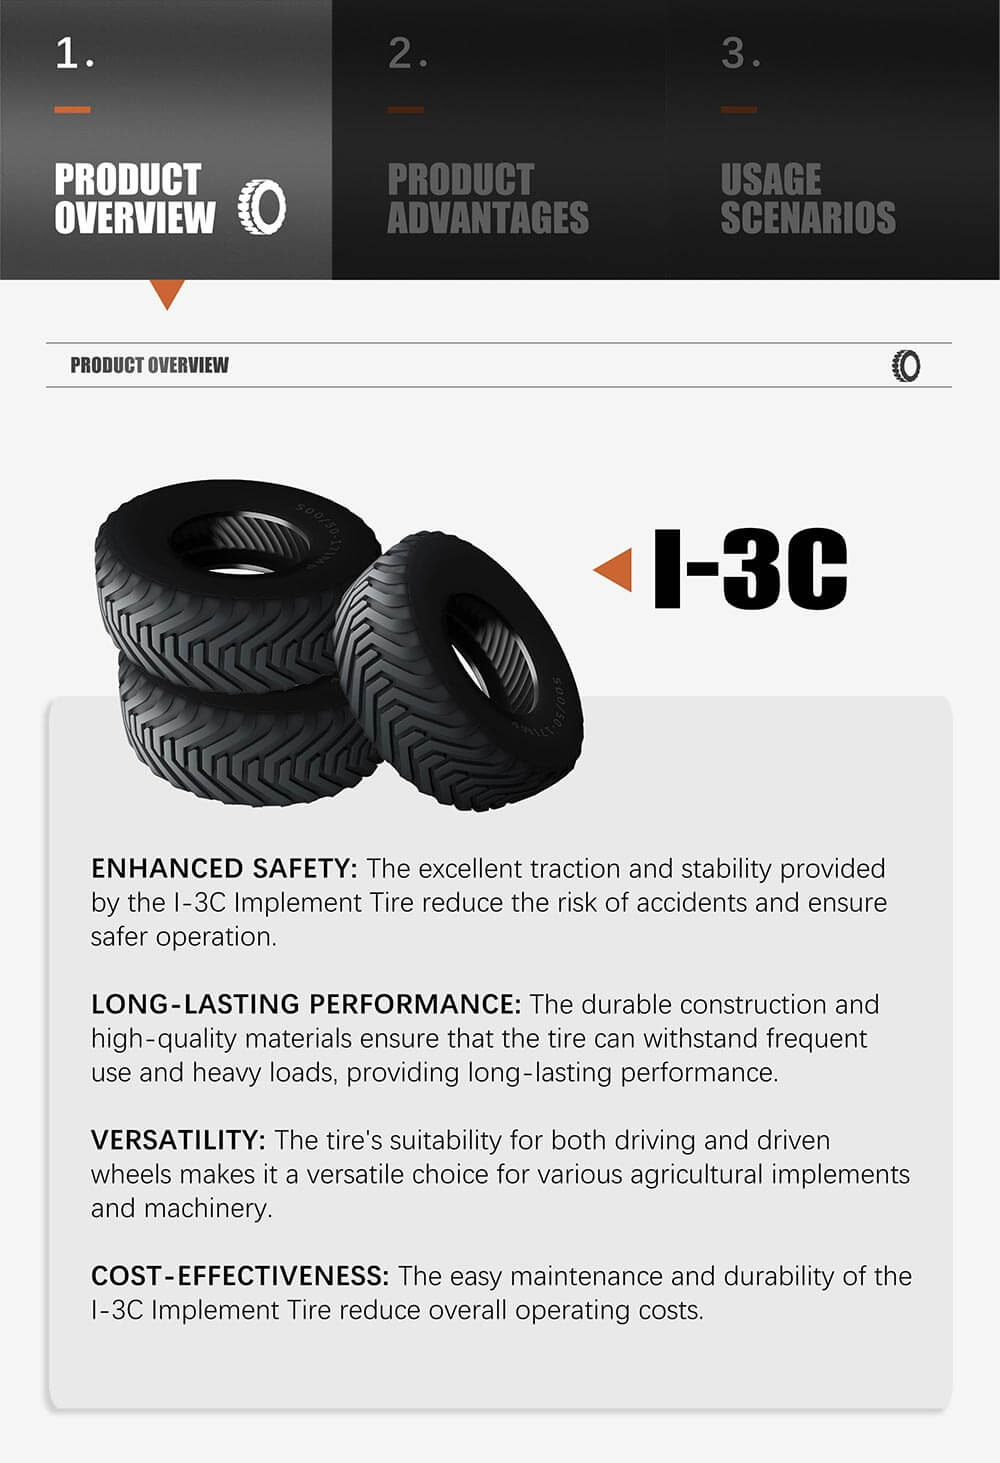 I-3C Implement Driving and Driven Wheel Tire